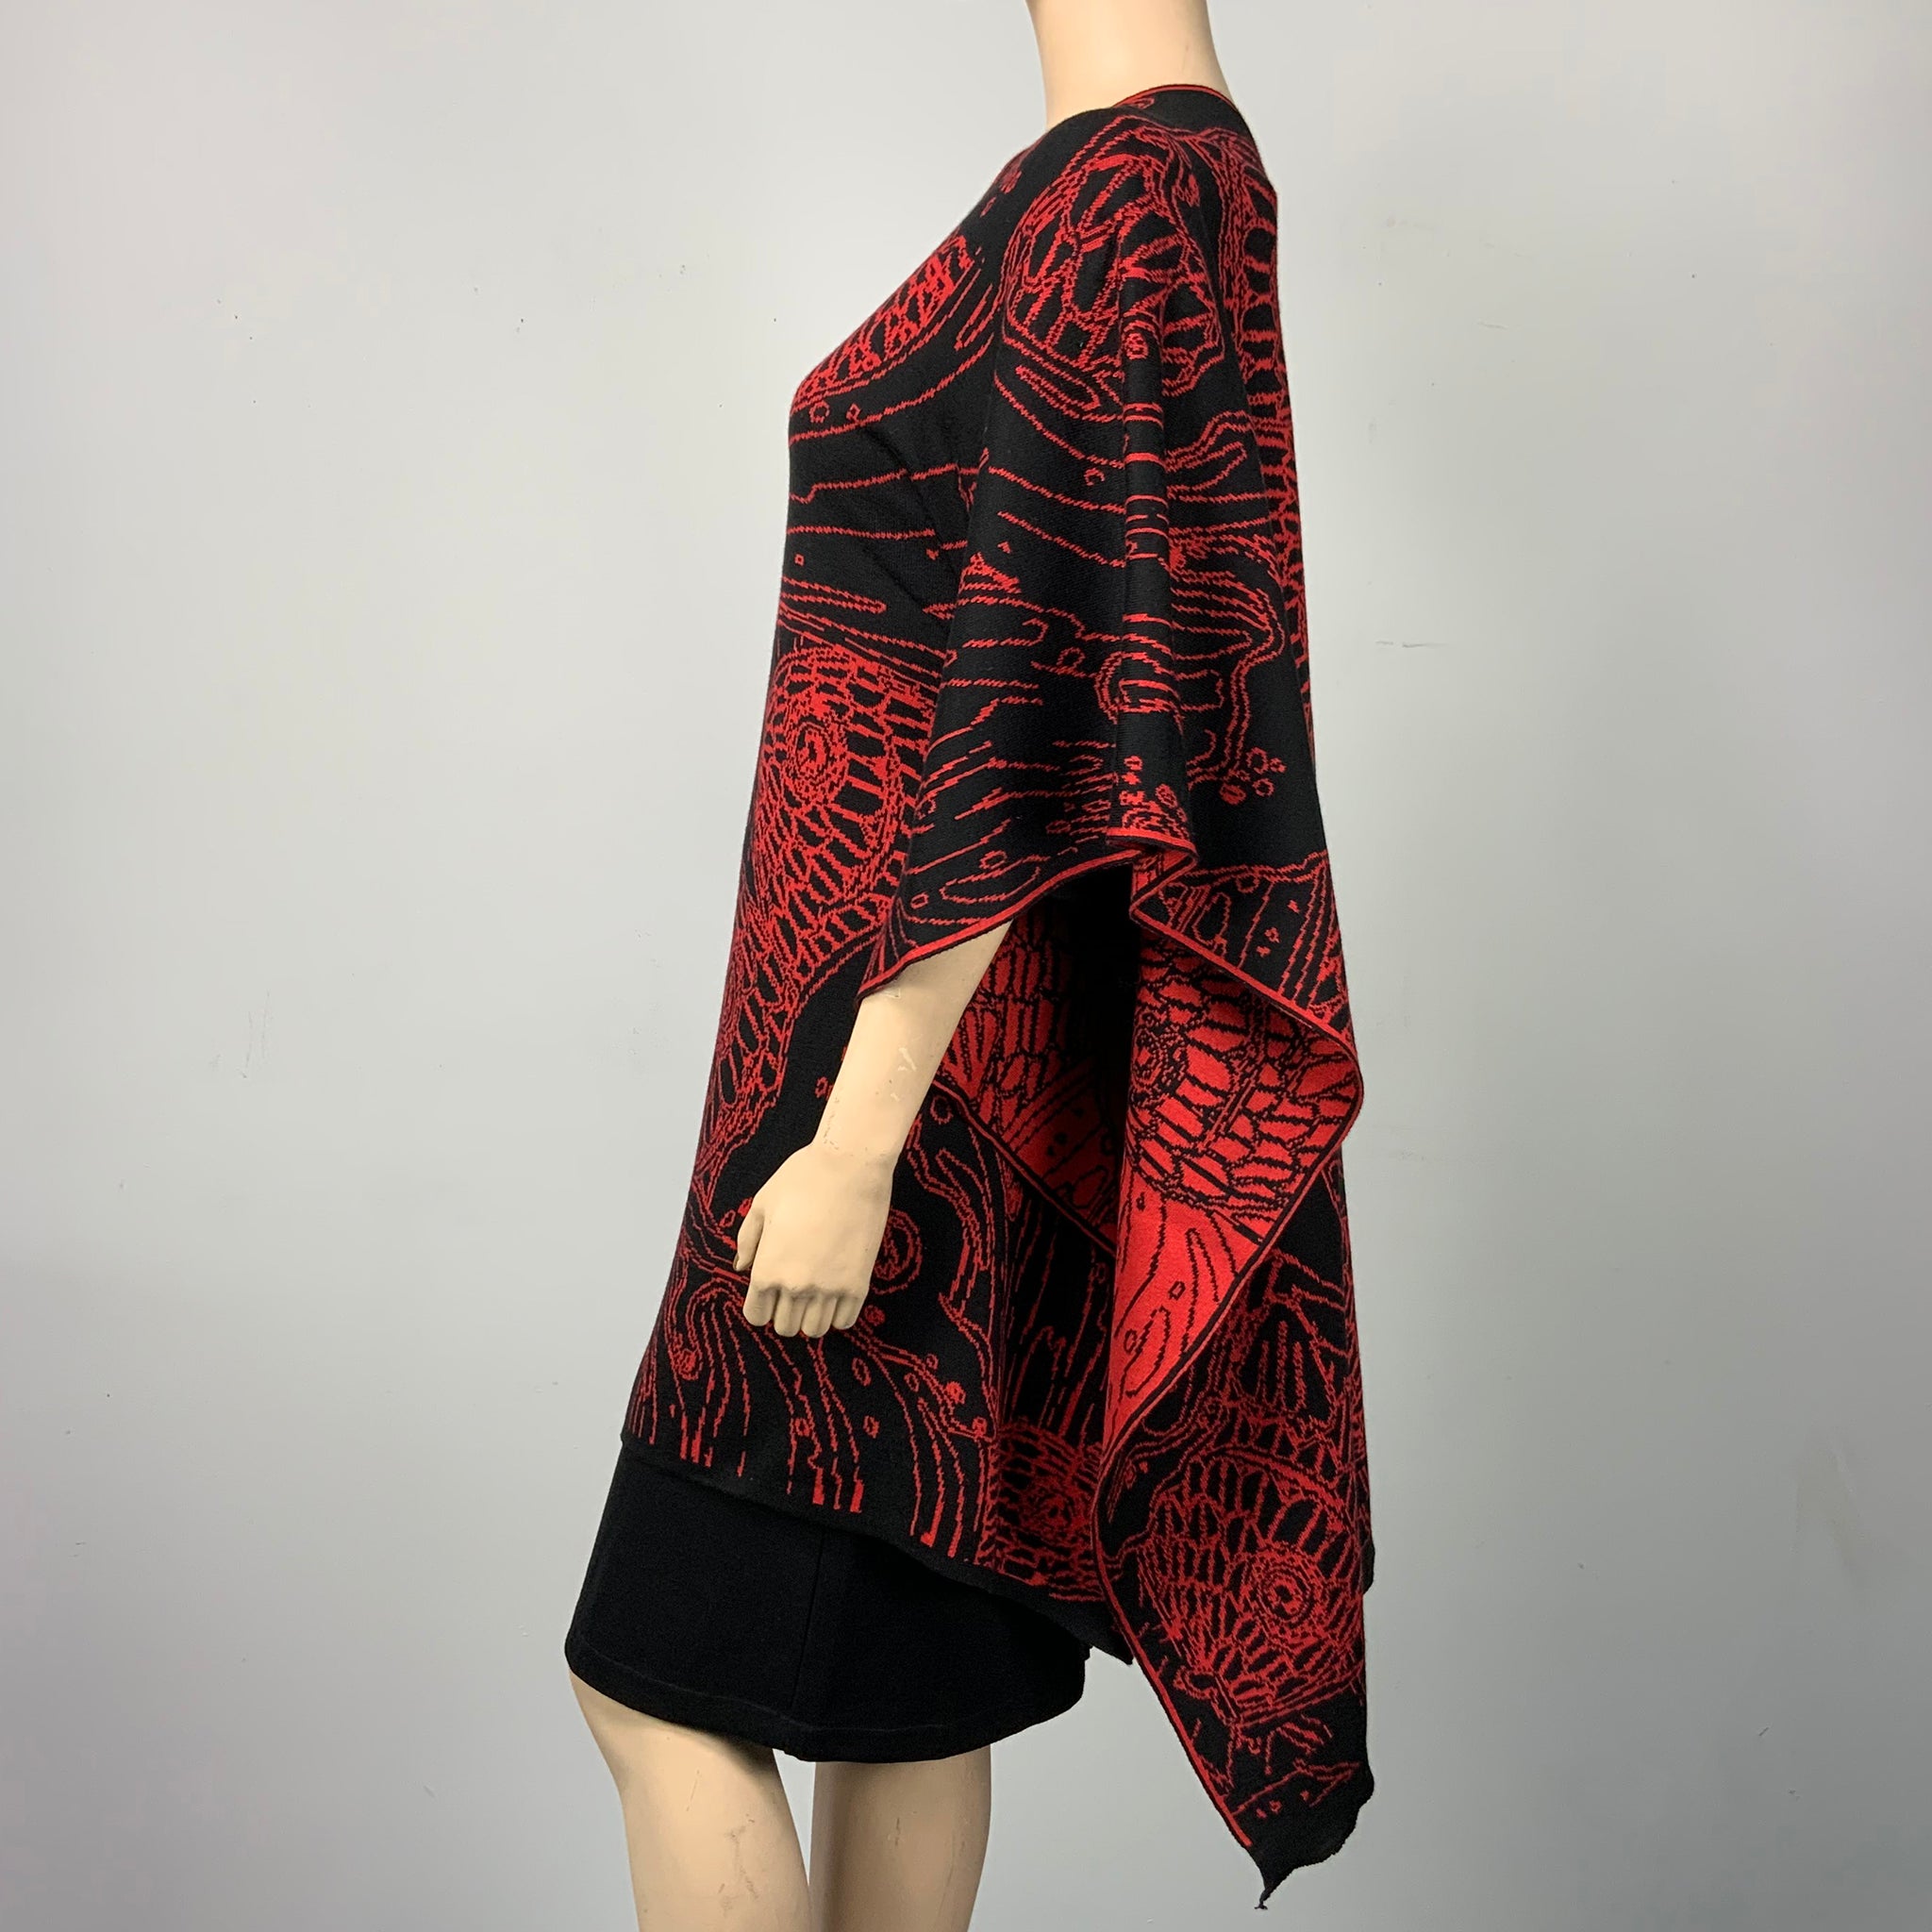 Ocean Cape Black and Red